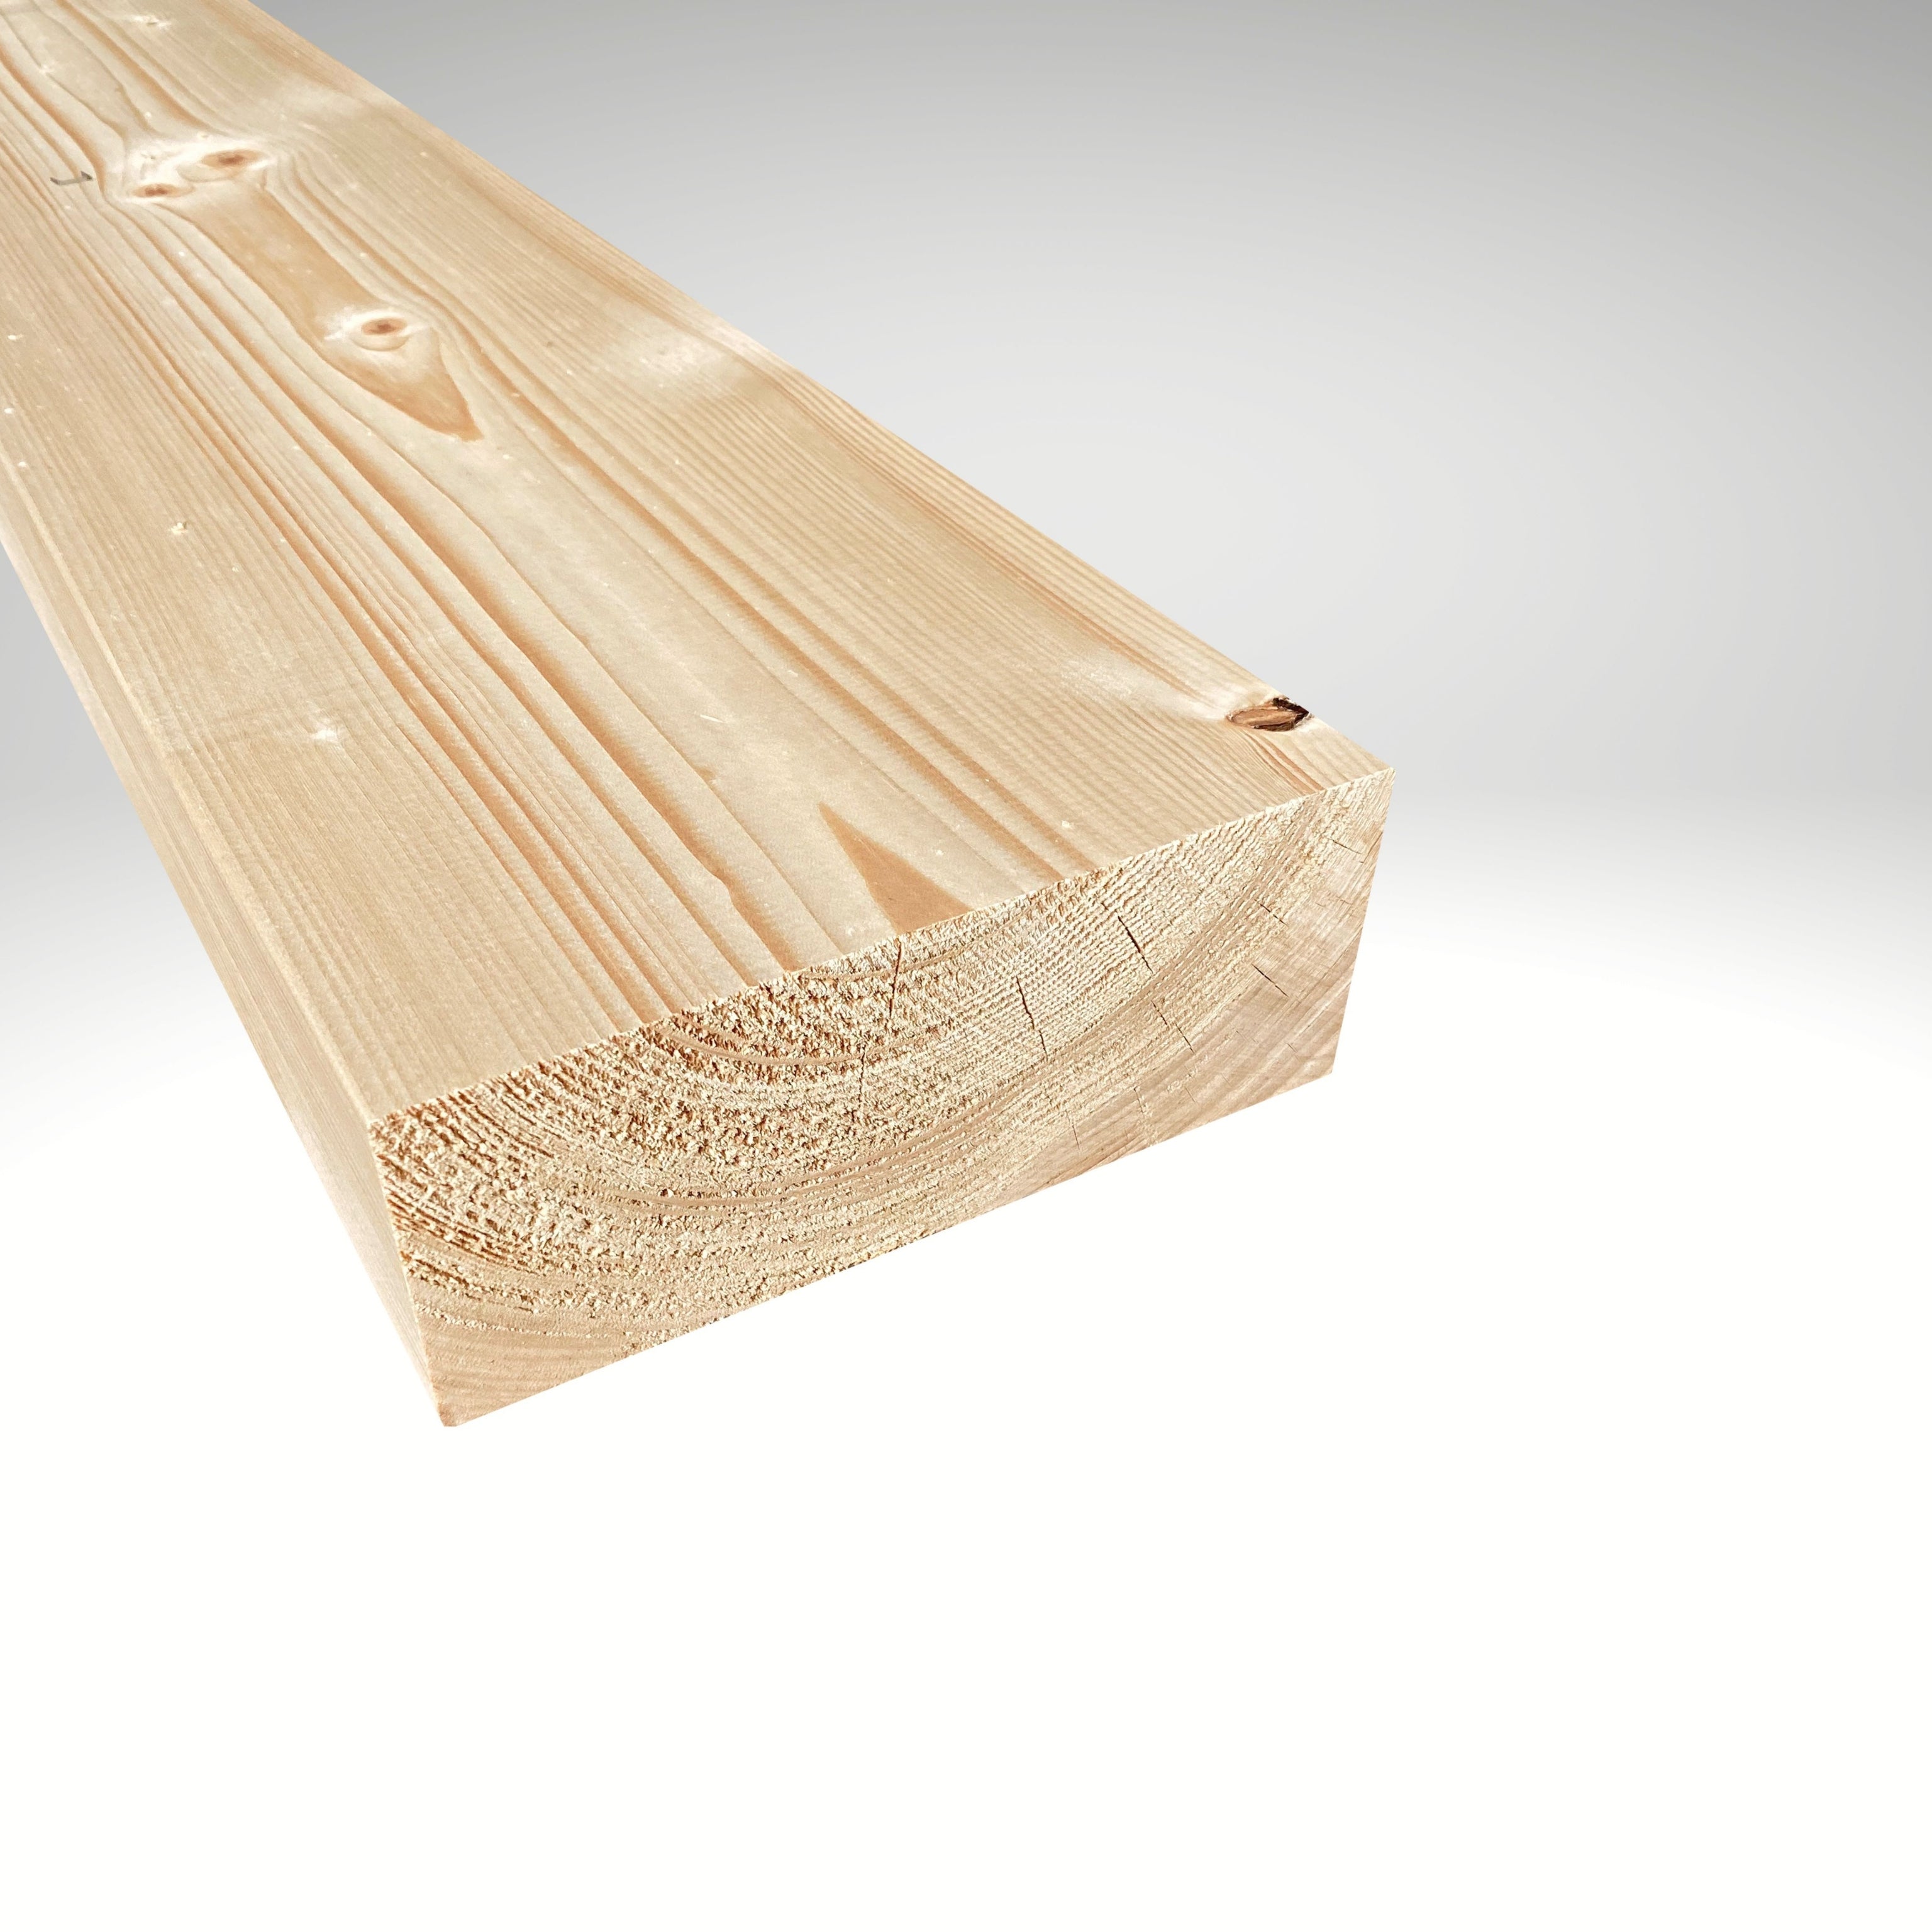 Thickness 95mm - Planed Spruce